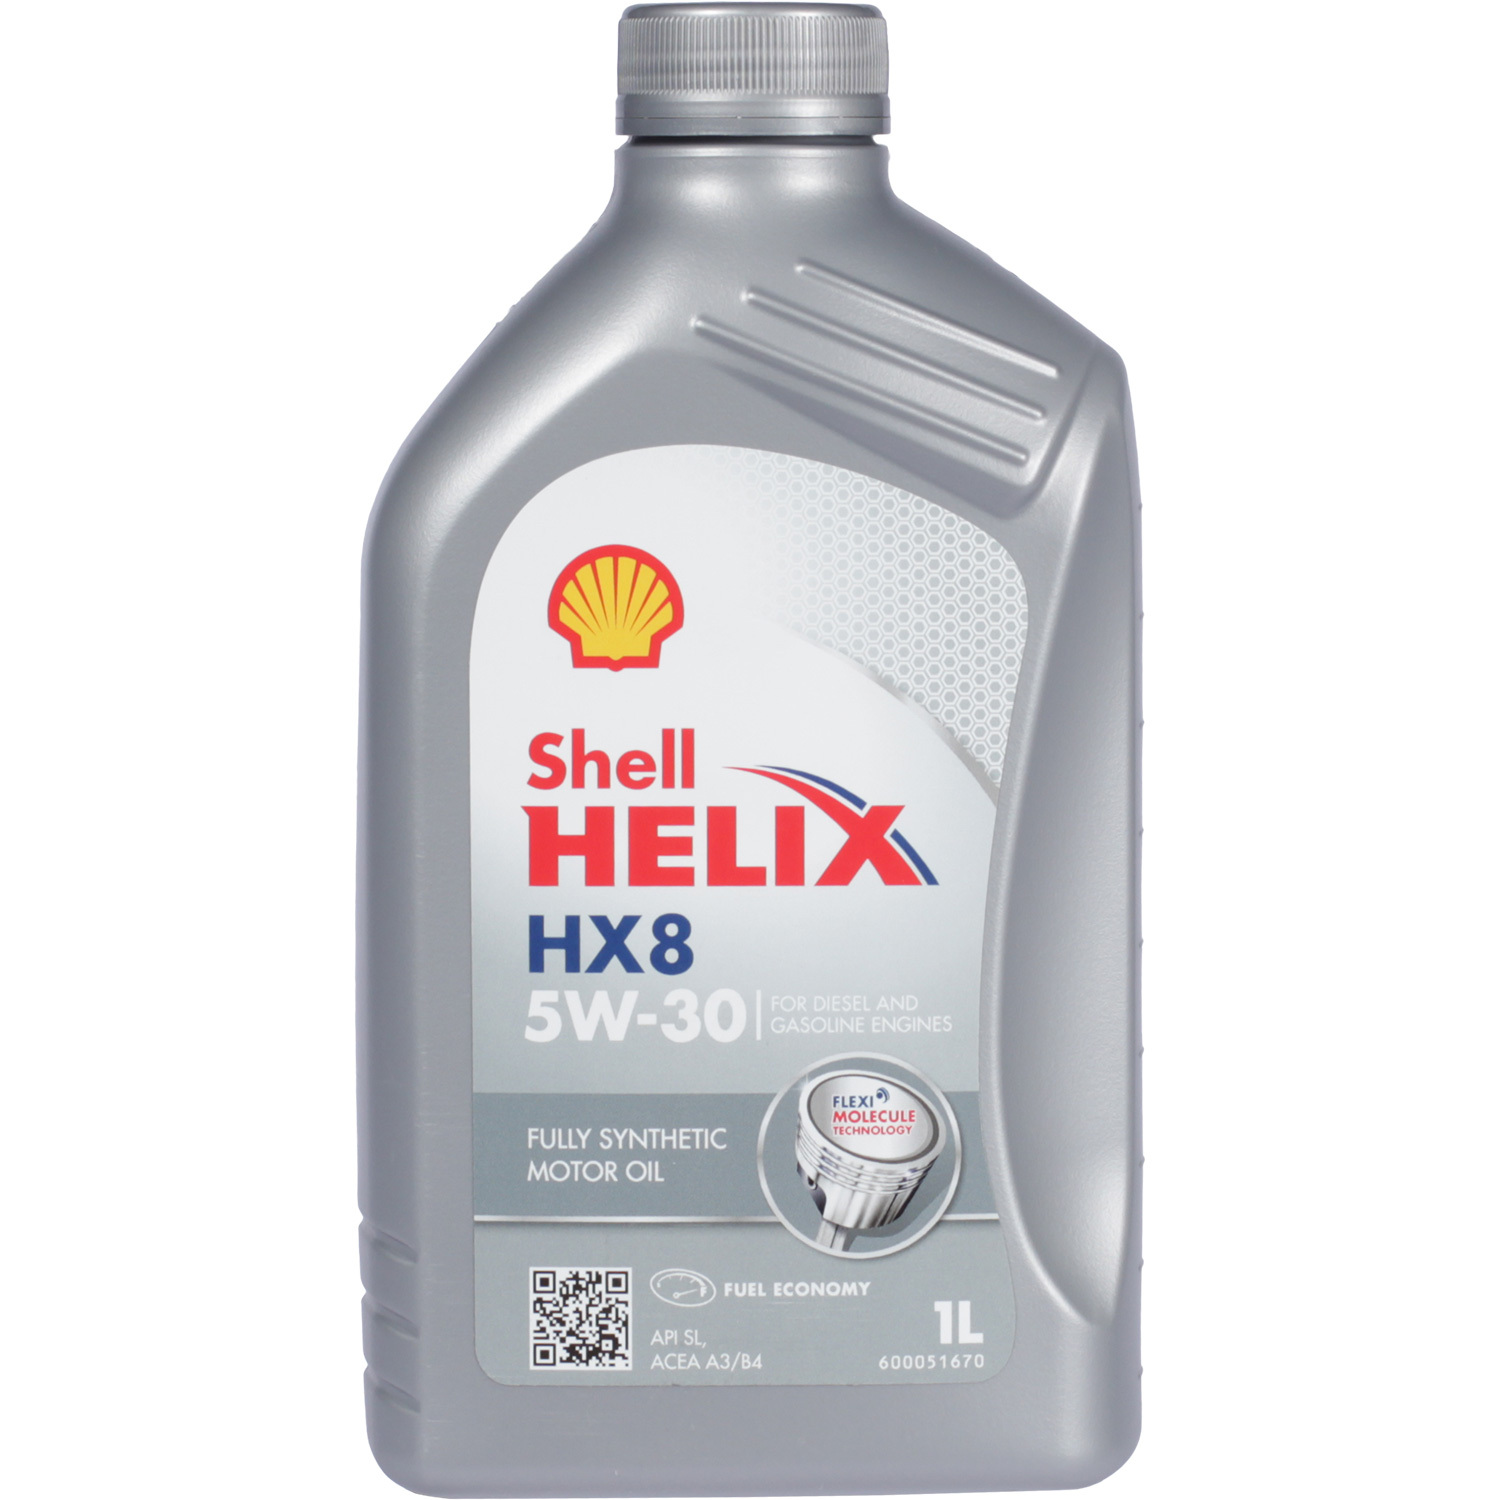 Shell Моторное масло Shell Helix HX8 5W-30, 1 л shell моторное масло shell helix hx7 5w 40 1 л